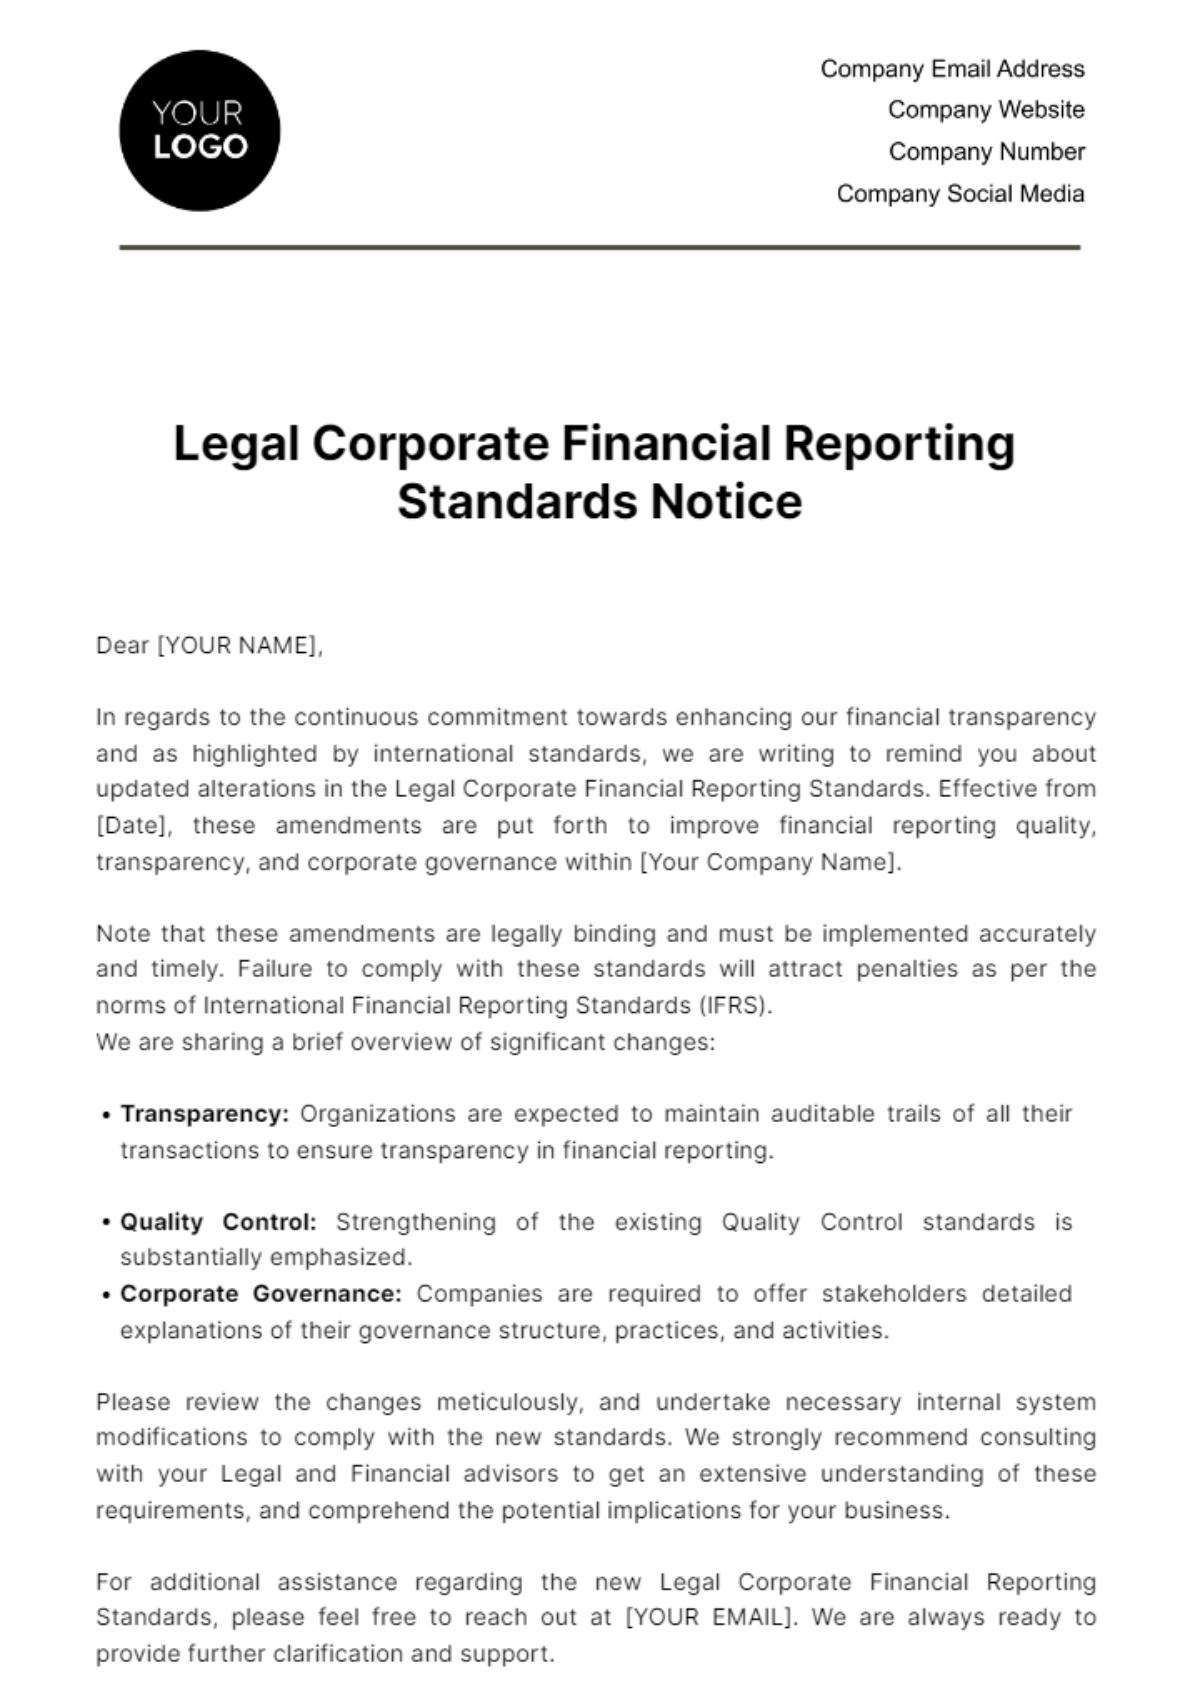 Legal Corporate Financial Reporting Standards Notice Template